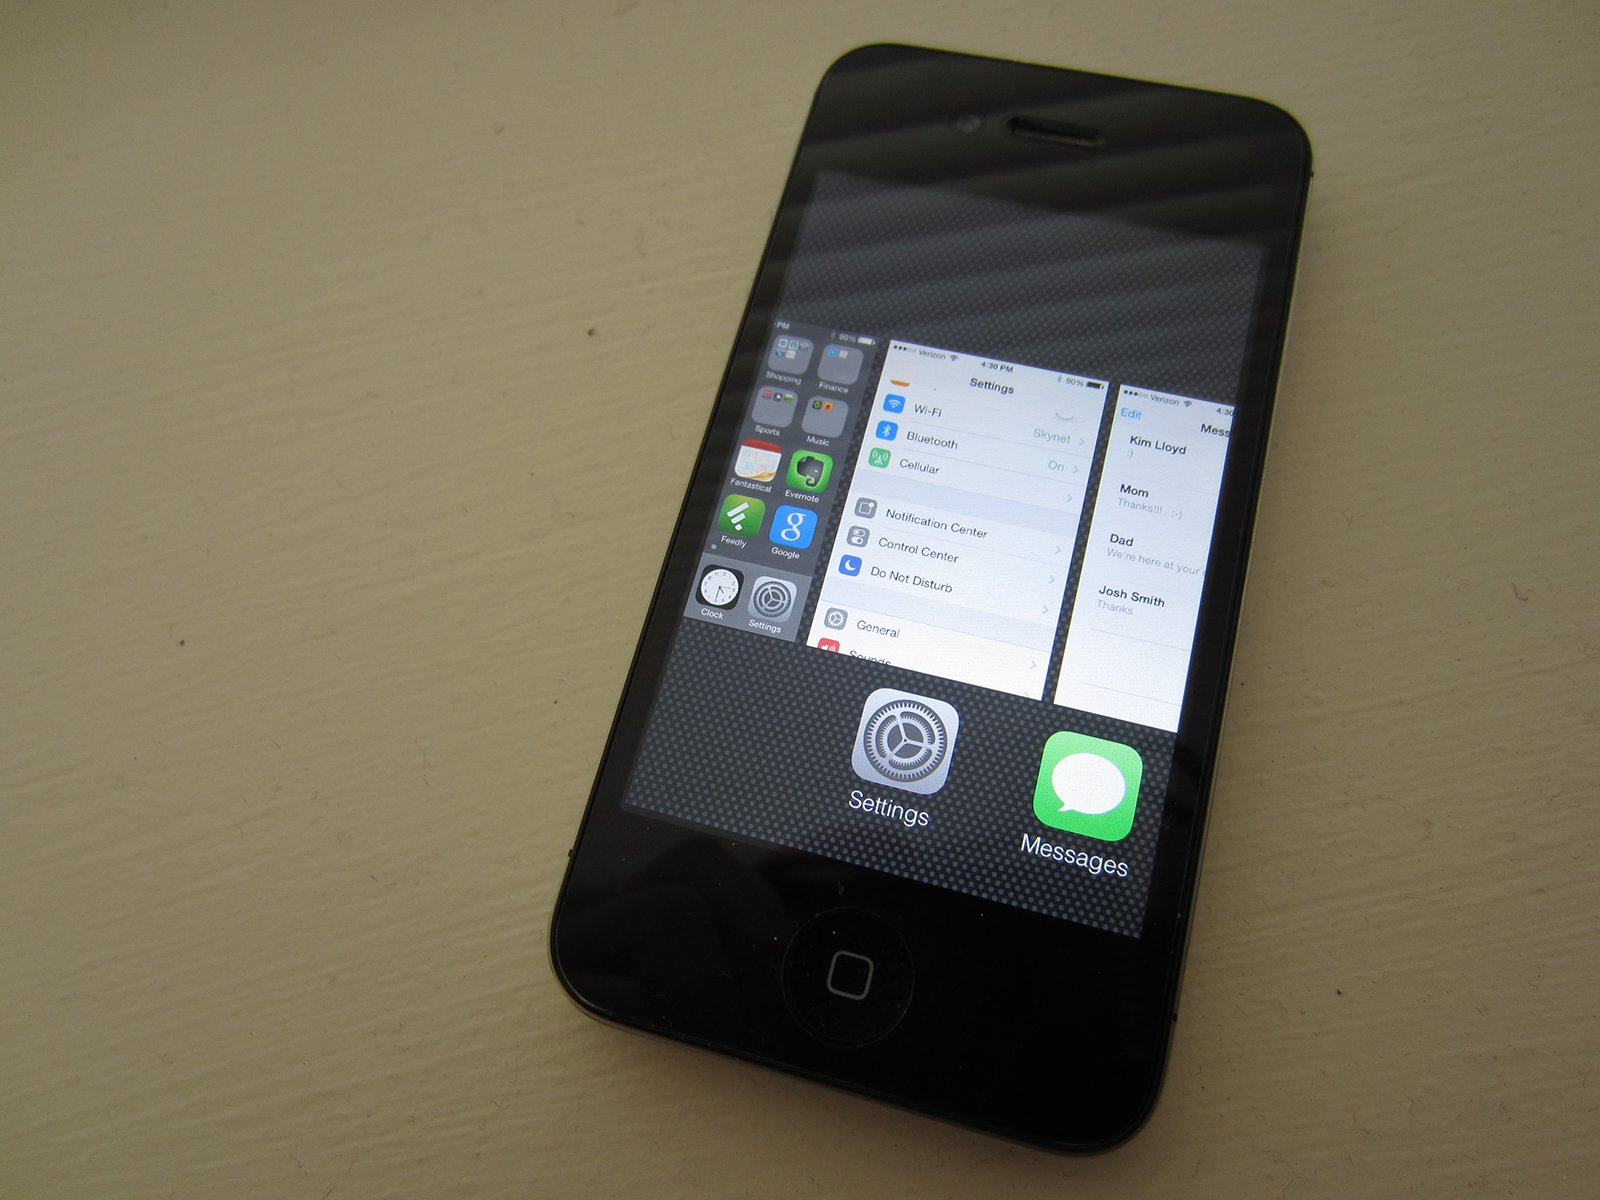 User reviews rave about the iOS 8.1 iPhone 4s performance.